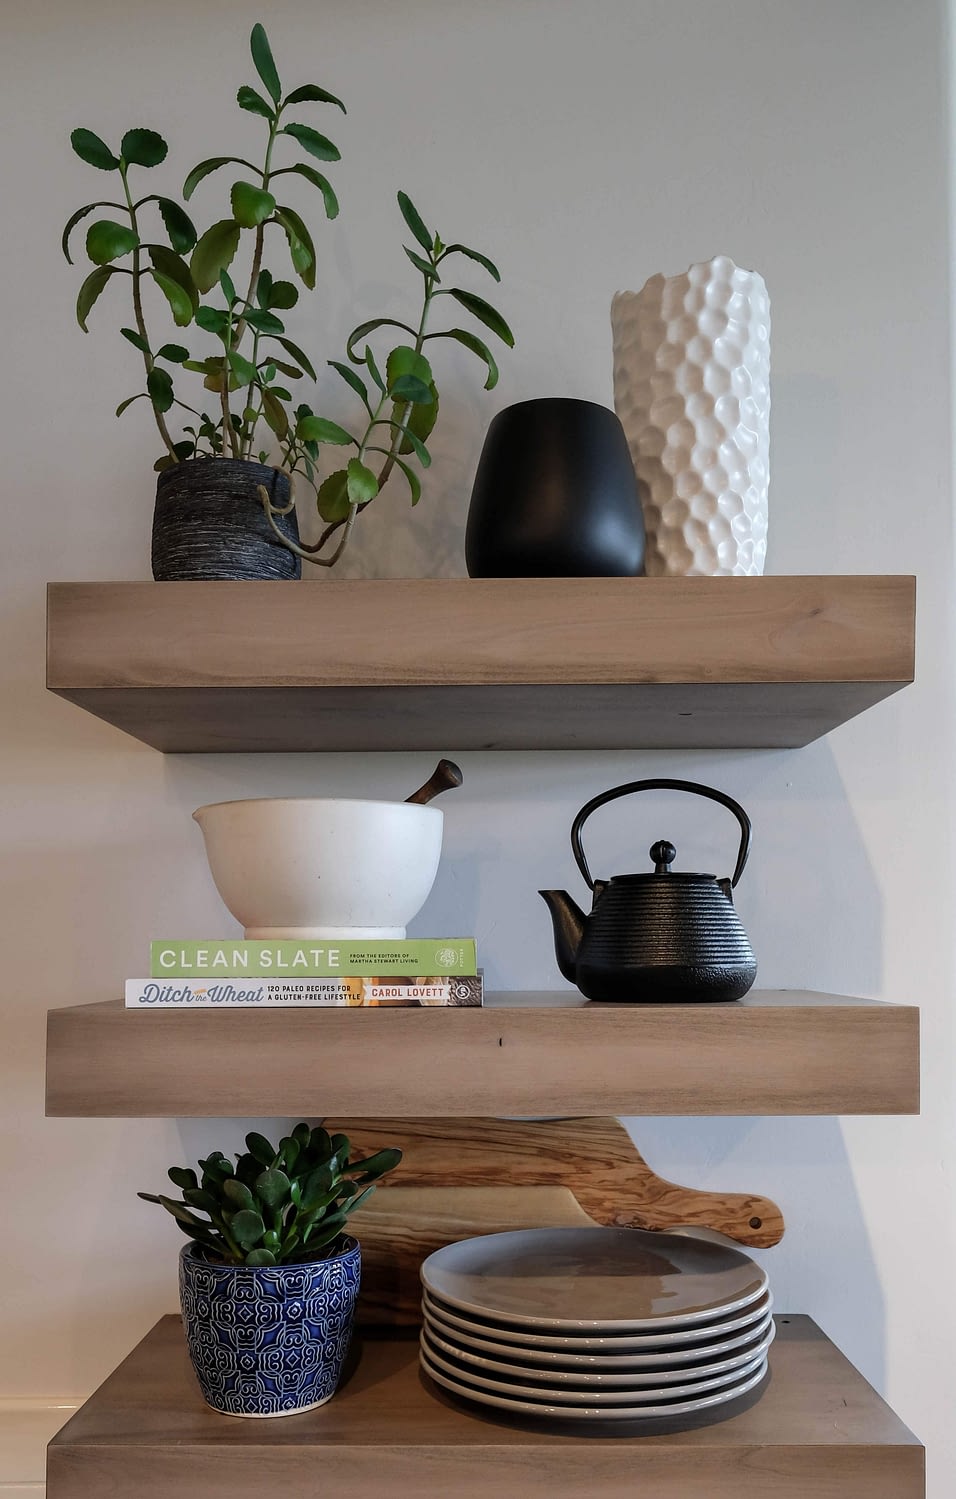 Parade of Homes styled shelf with books, plates, teapot, and plants